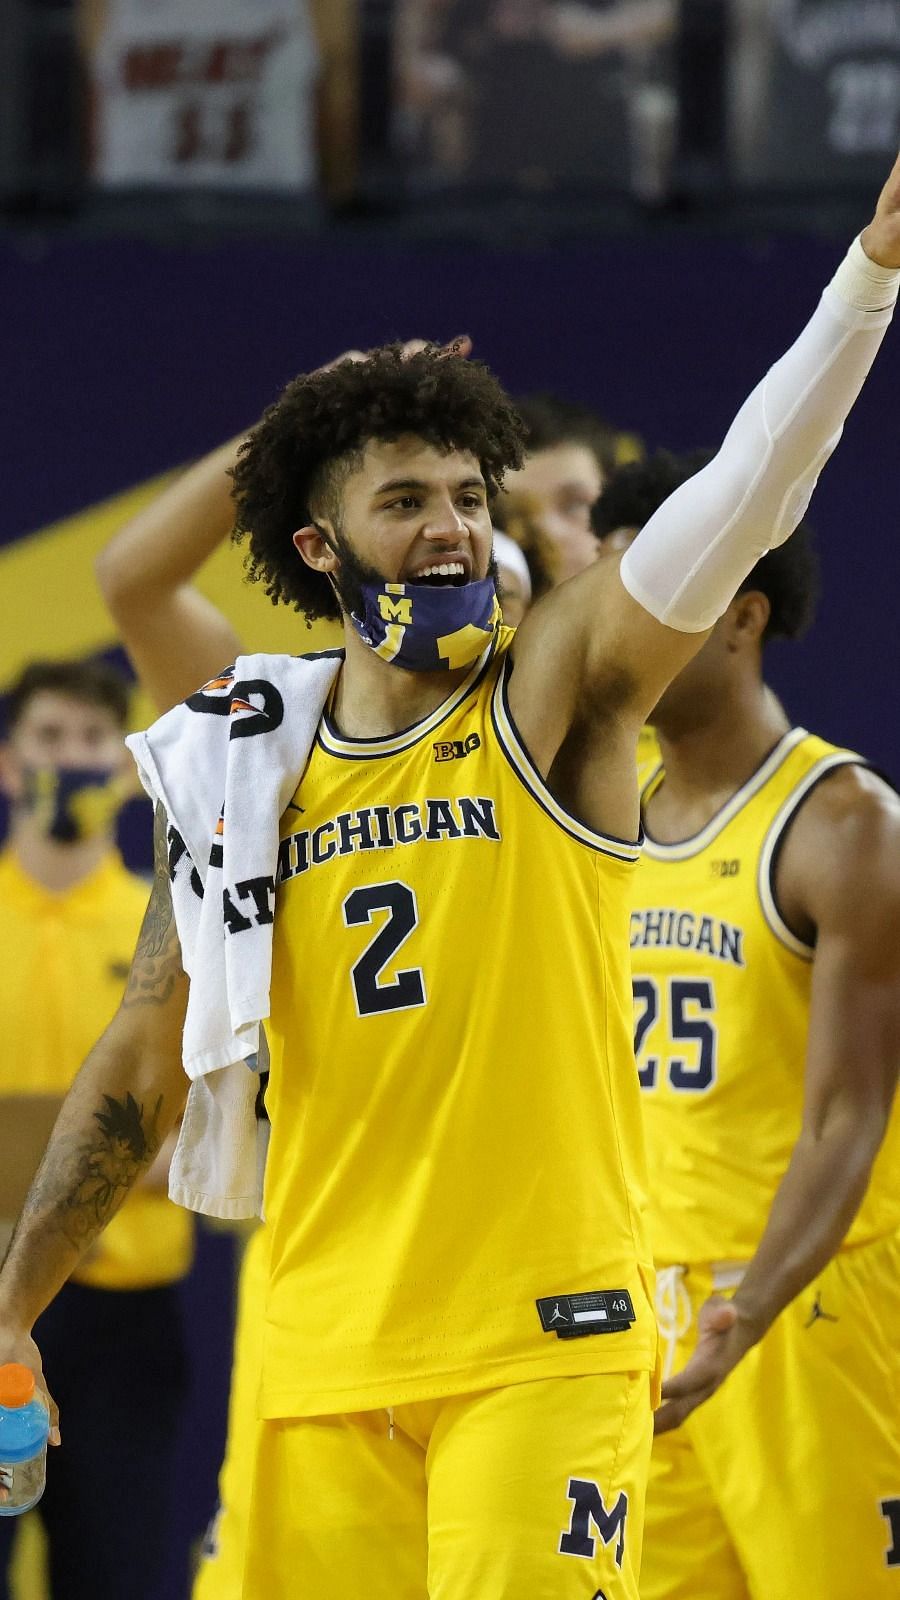 Michigan Wolverines Vs Rutgers Scarlet Knights Prediction Match Preview February 18 2021 Ncaa Men S Basketball